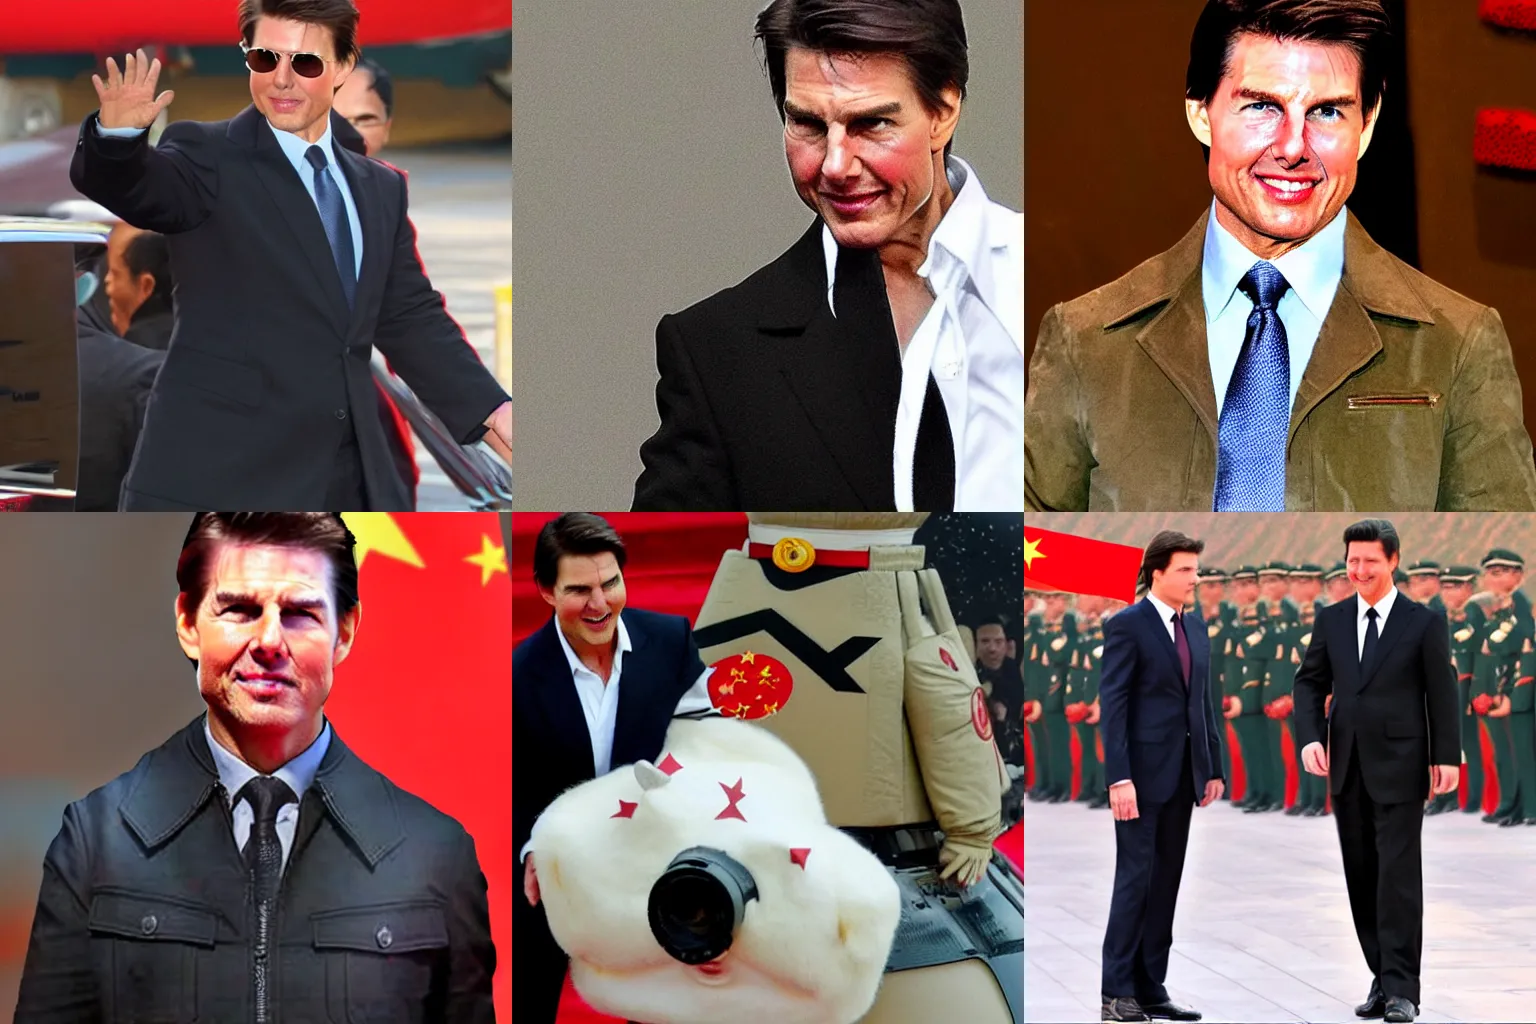 Prompt: Tom Cruise dressed as Xi Jinping